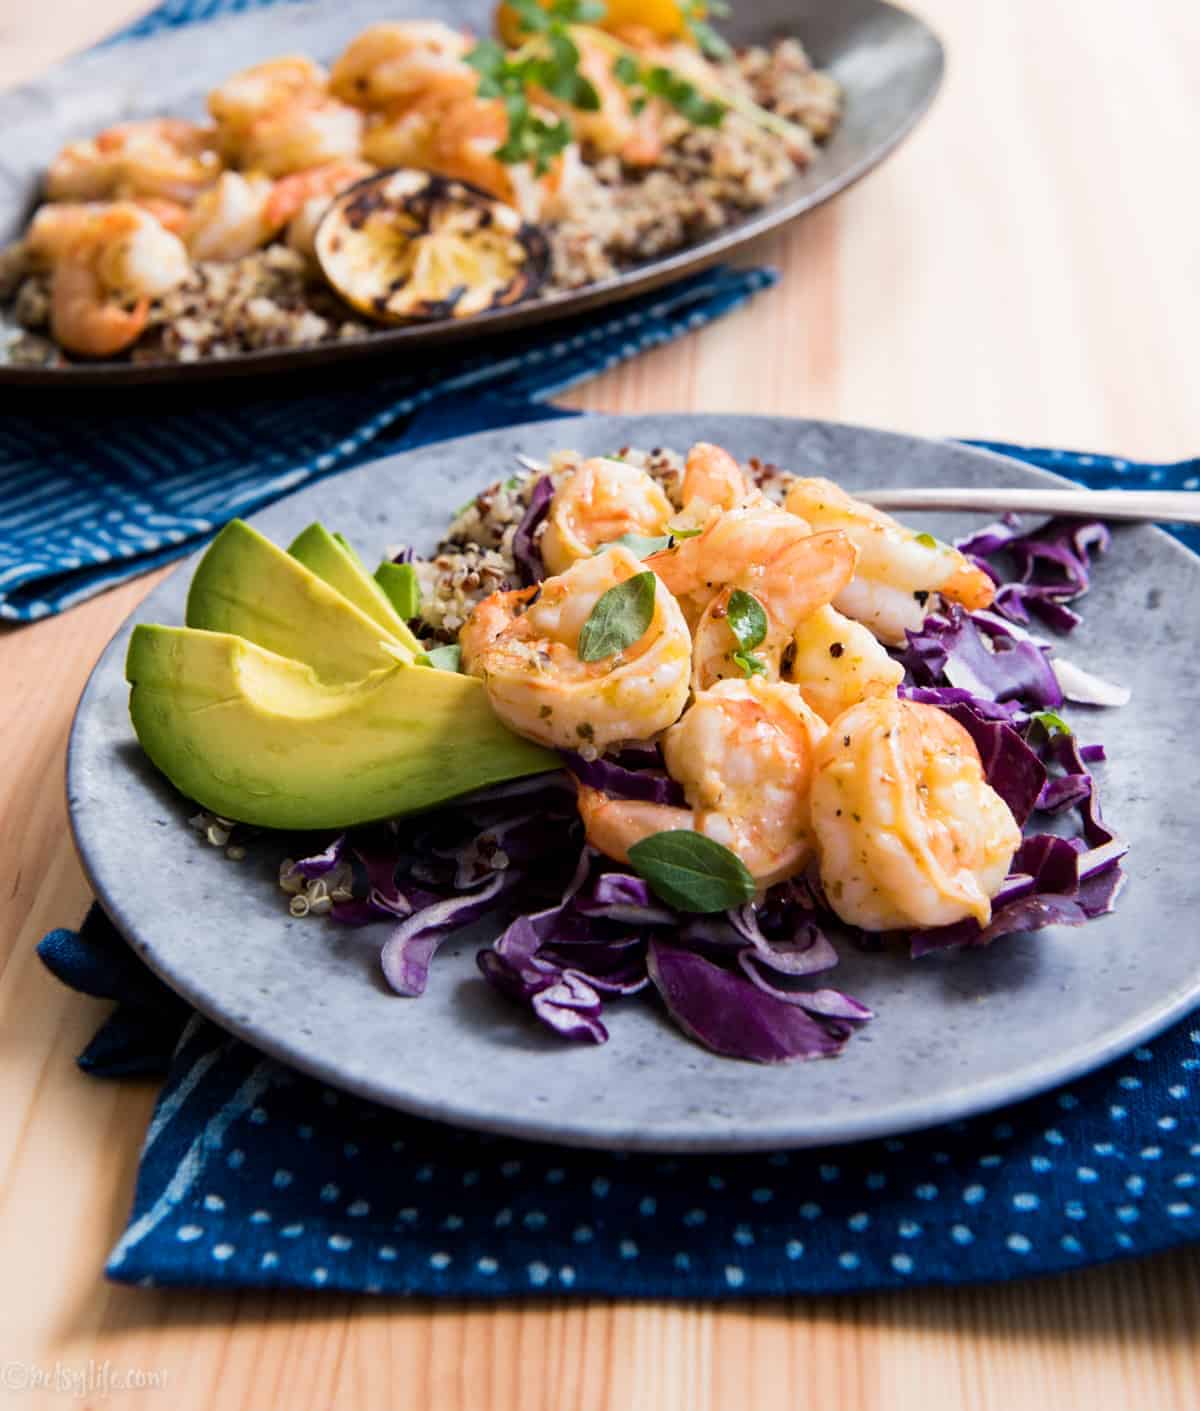 gray plate with a serving of orange shrimp, purple cabbage and avocado on a blue napkin